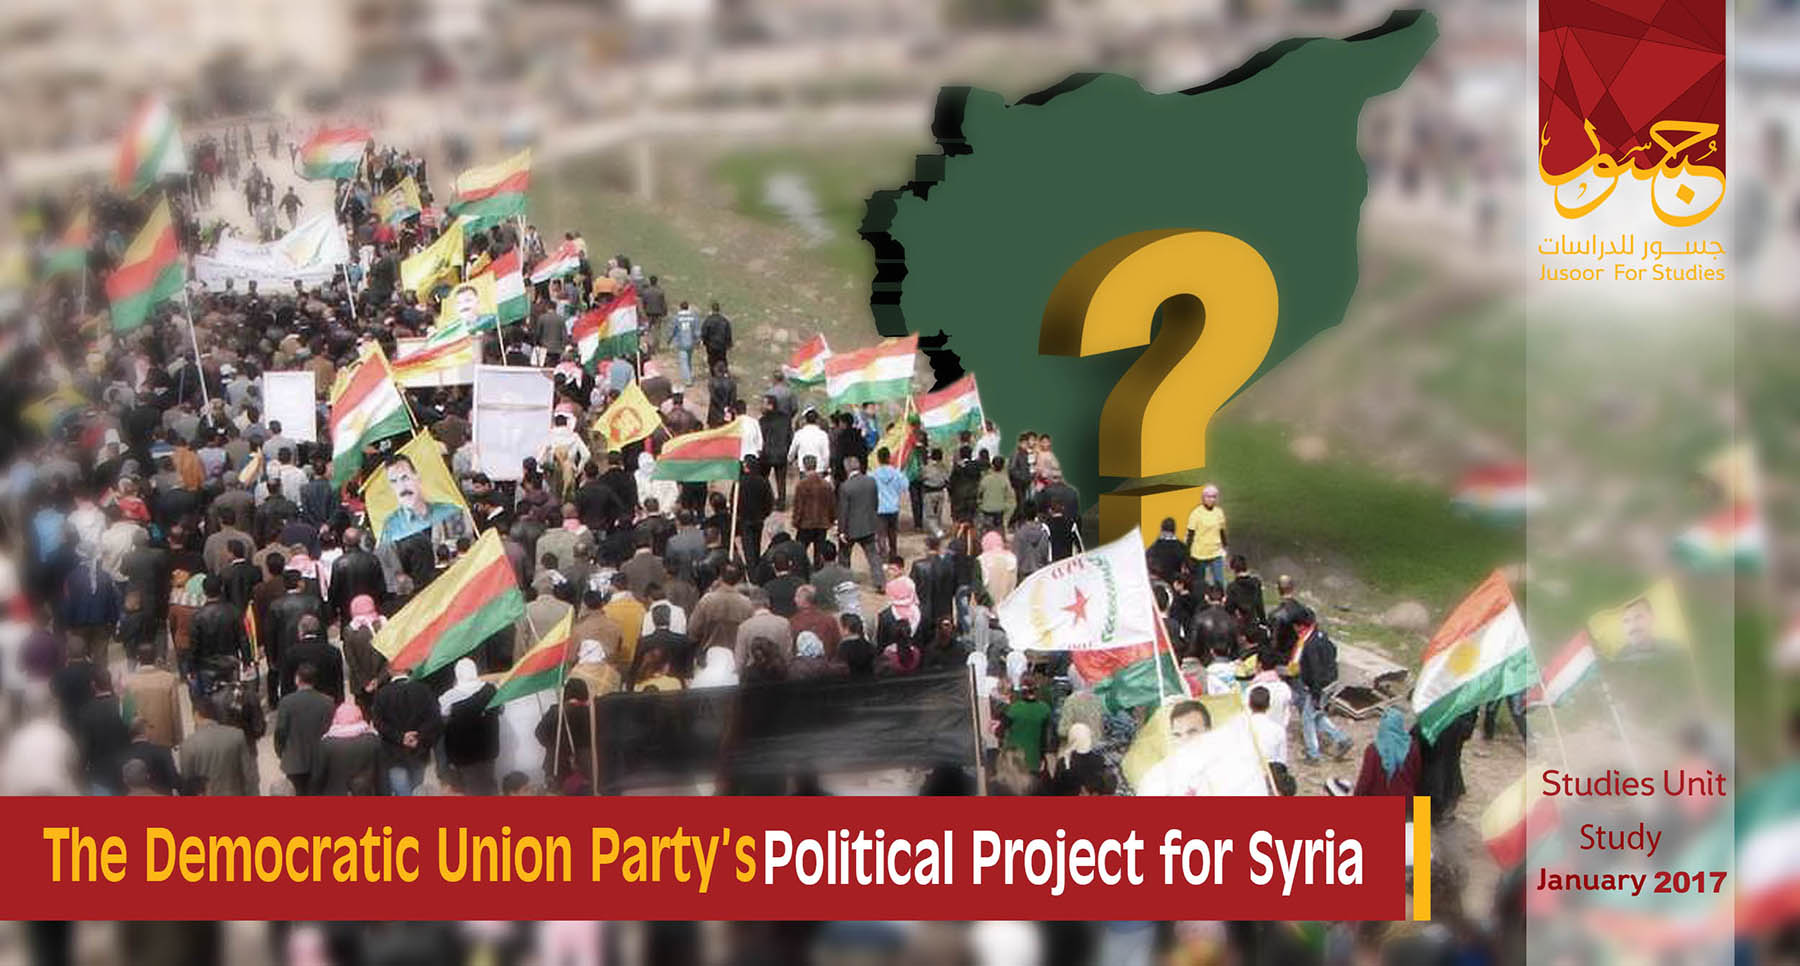 The Democratic Union Party’s Political Project for Syria